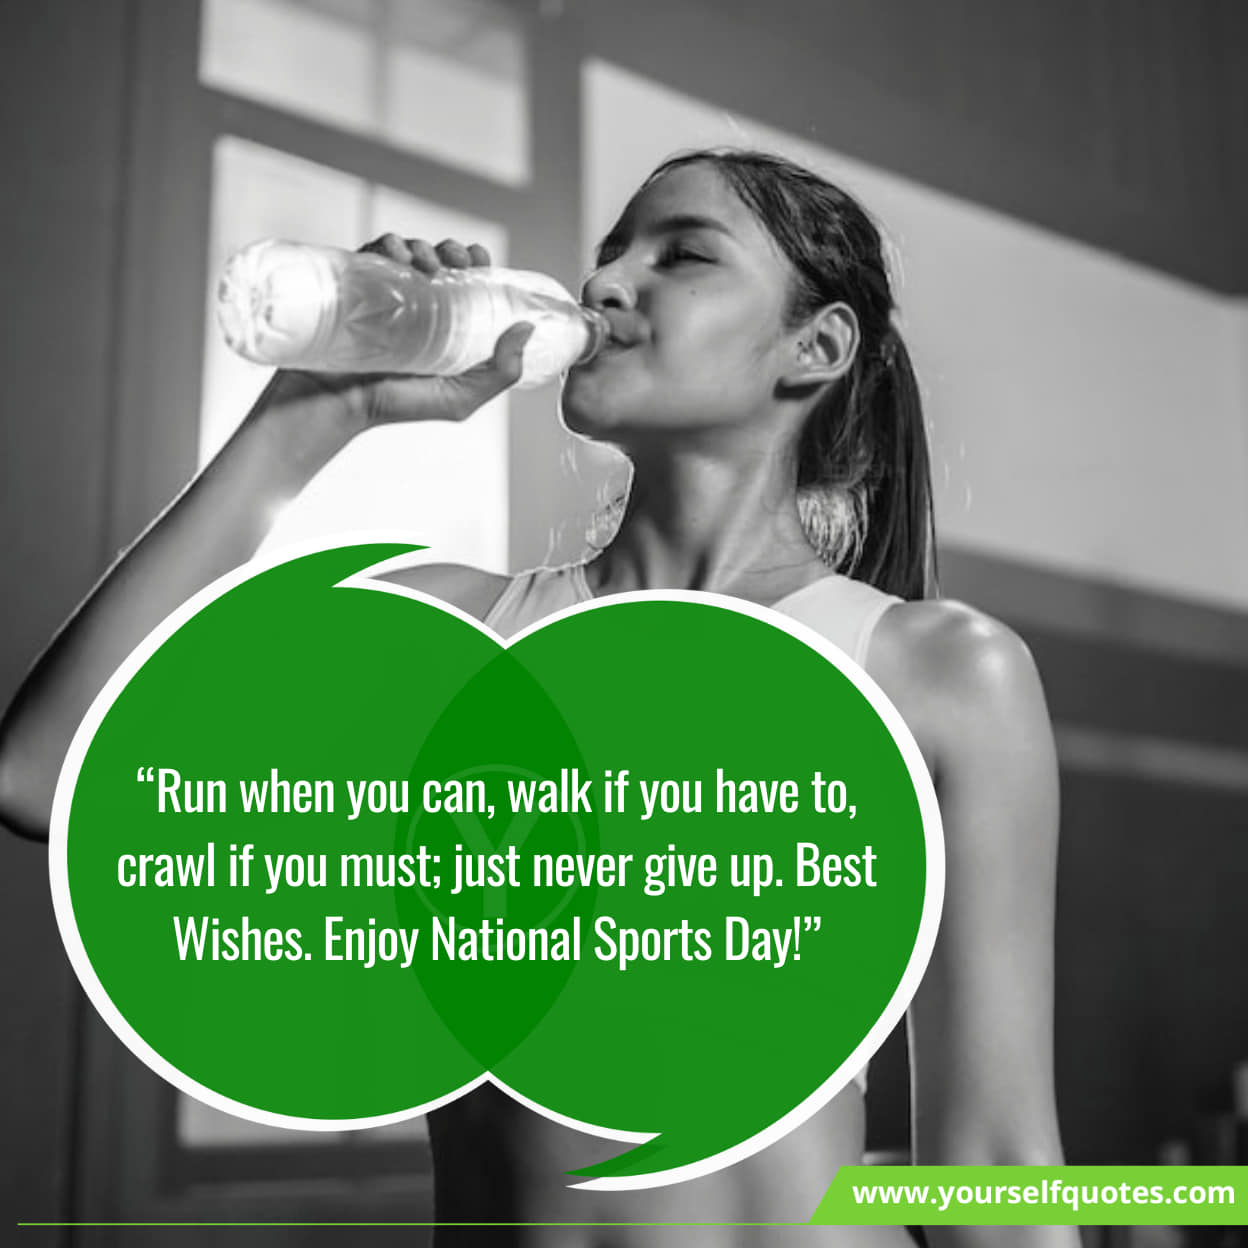 Wishes for a memorable and successful National Sports Day celebration